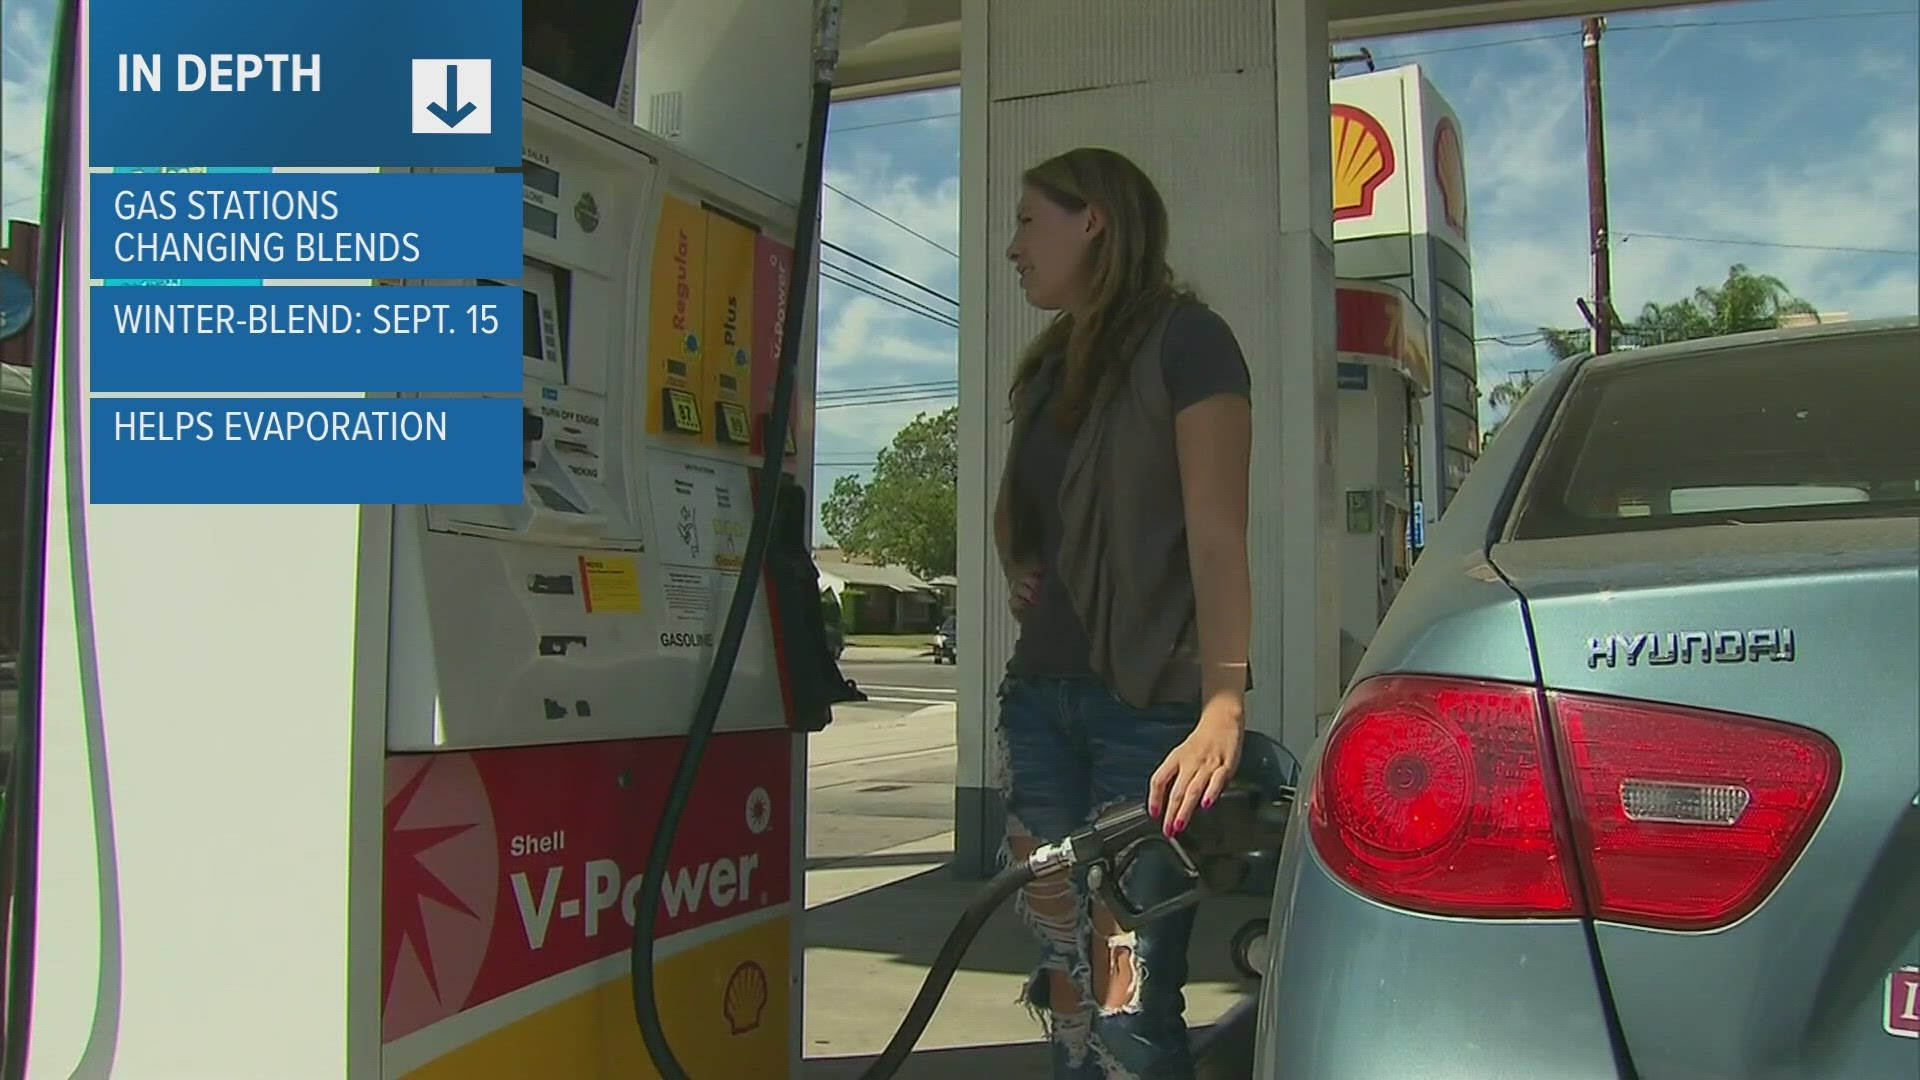 Gas stations were able to switch over to a winter blend on Sept. 15.